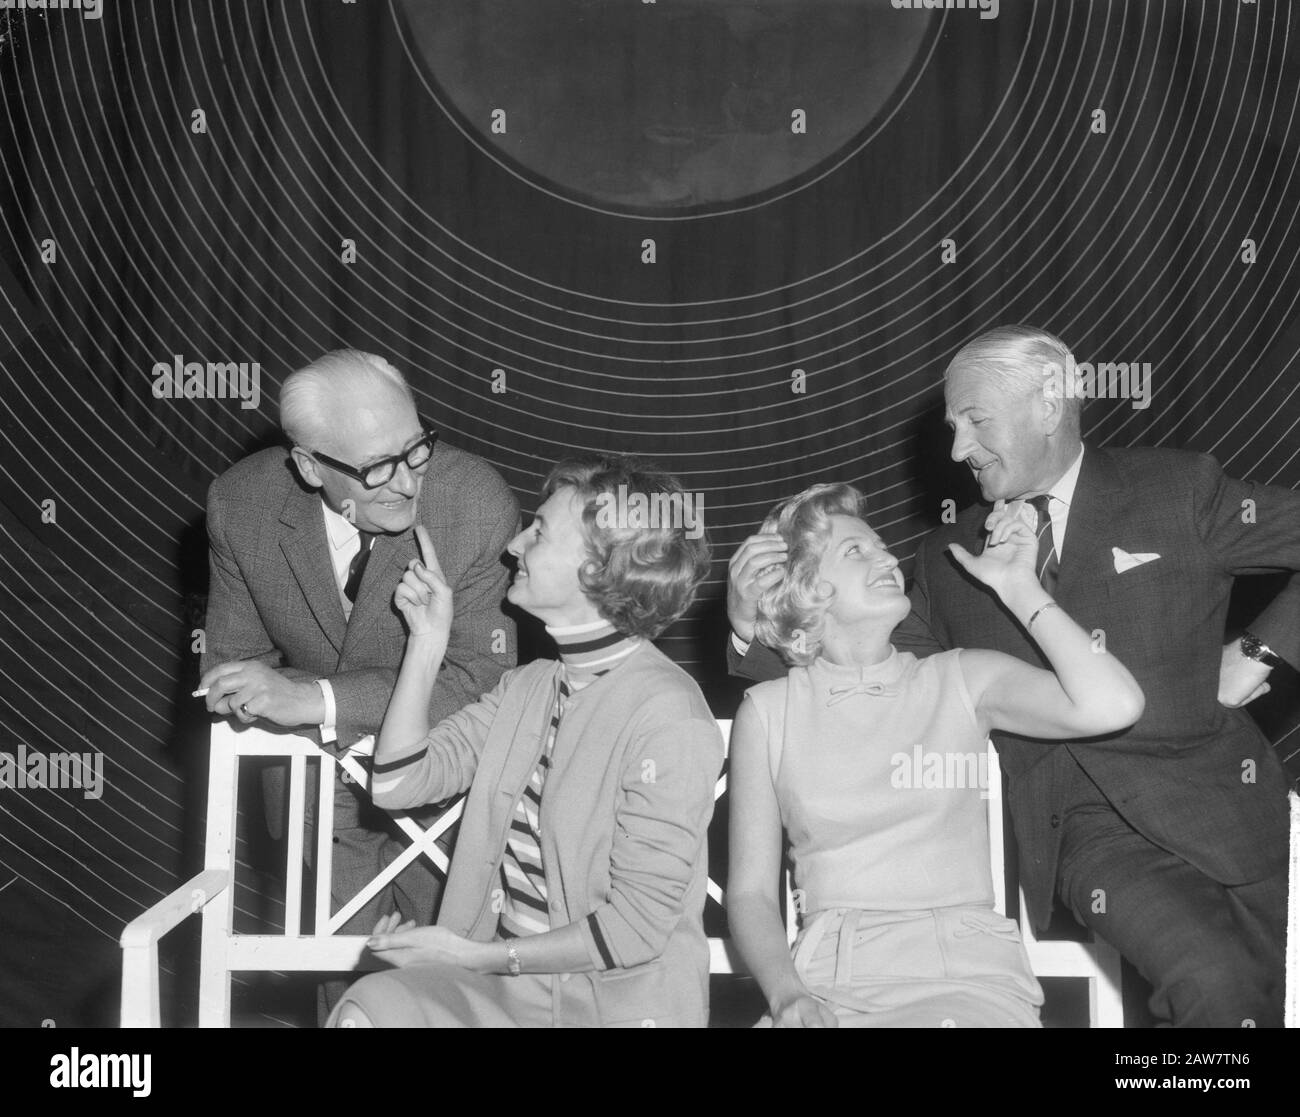 Premiere Snip and Snap Together revue From Friday, during rehearsal v.l.n.r. Piet Muyselaar, Aase Rasmussen, Mieke Telkamp and Willy Walden Date: January 21, 1965 Keywords: rehearsals, revues Person Name: Muyselaar, Peter Rasmussen, Aase, Telkamp, Mieke, Walden, Willy Stock Photo